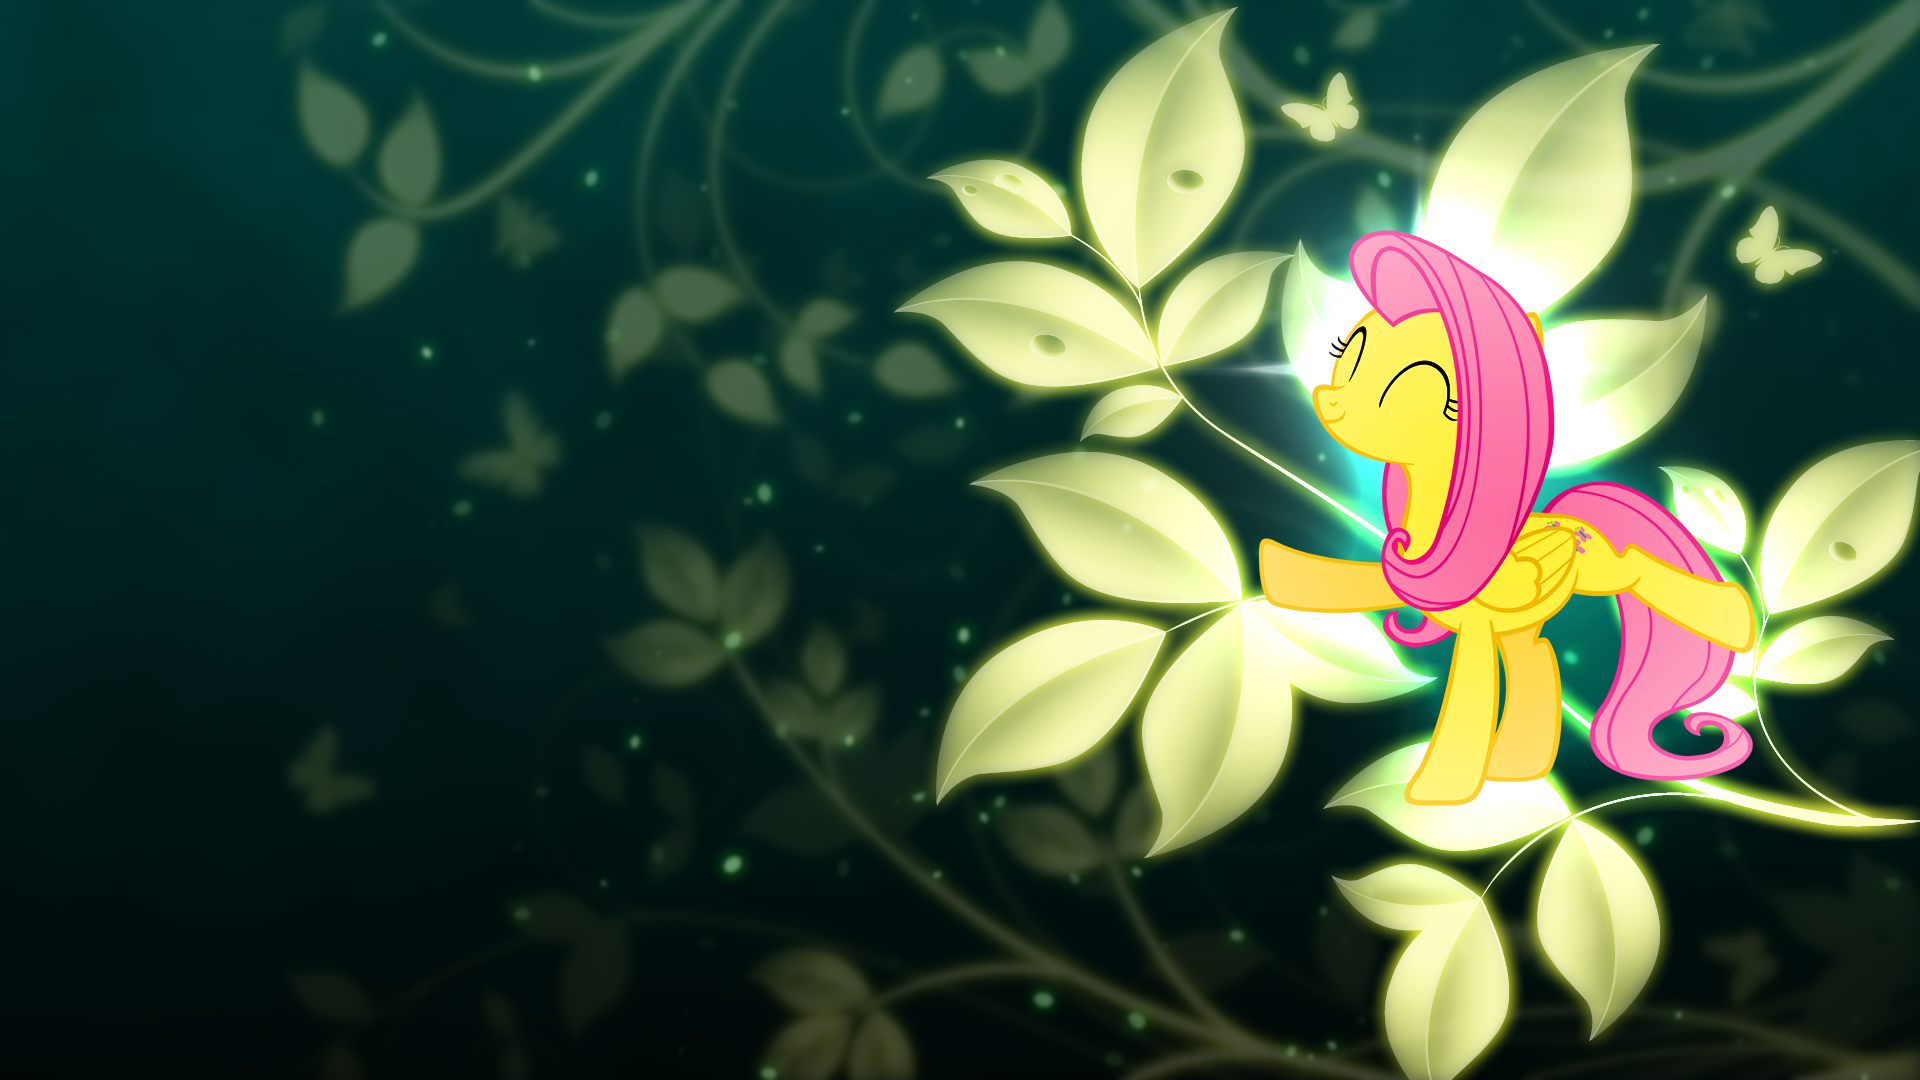 Fluttershy Wallpaper Ver.3 by Coco-Kiwi, Episkopi and MoongazePonies